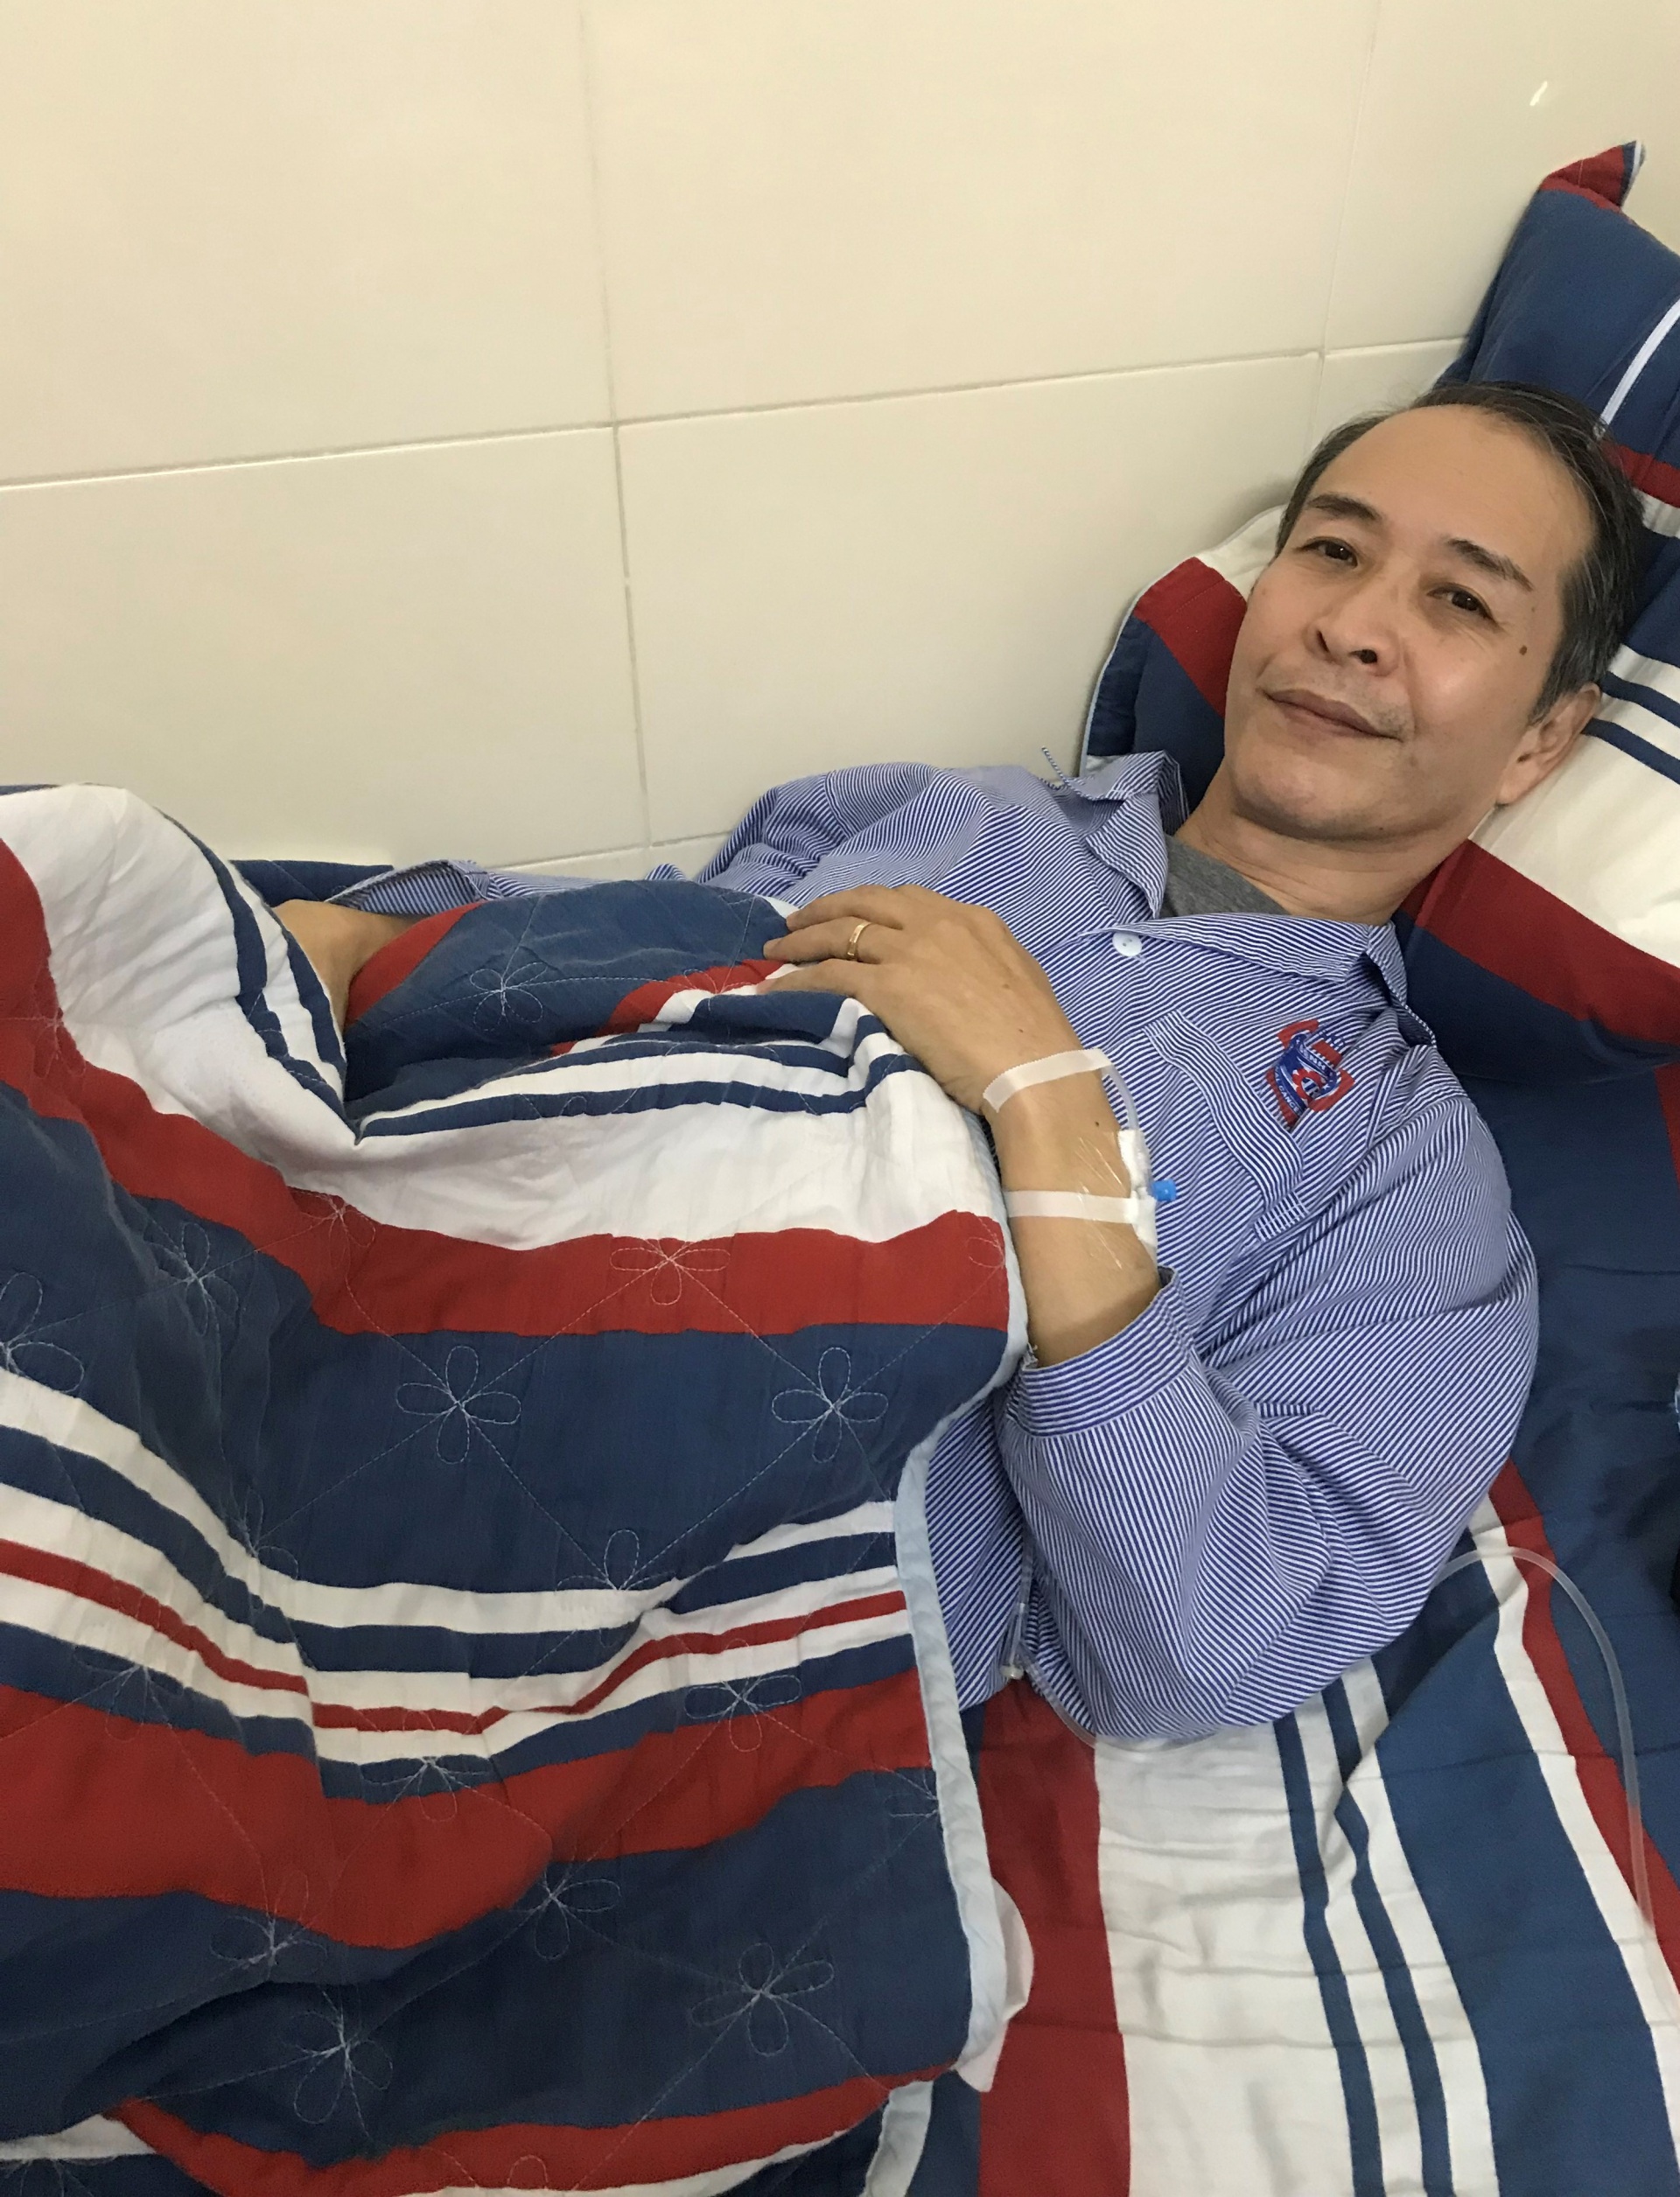 Japanese engineer chooses to undergo cancer surgery in Vietnam despite insurance coverage at home